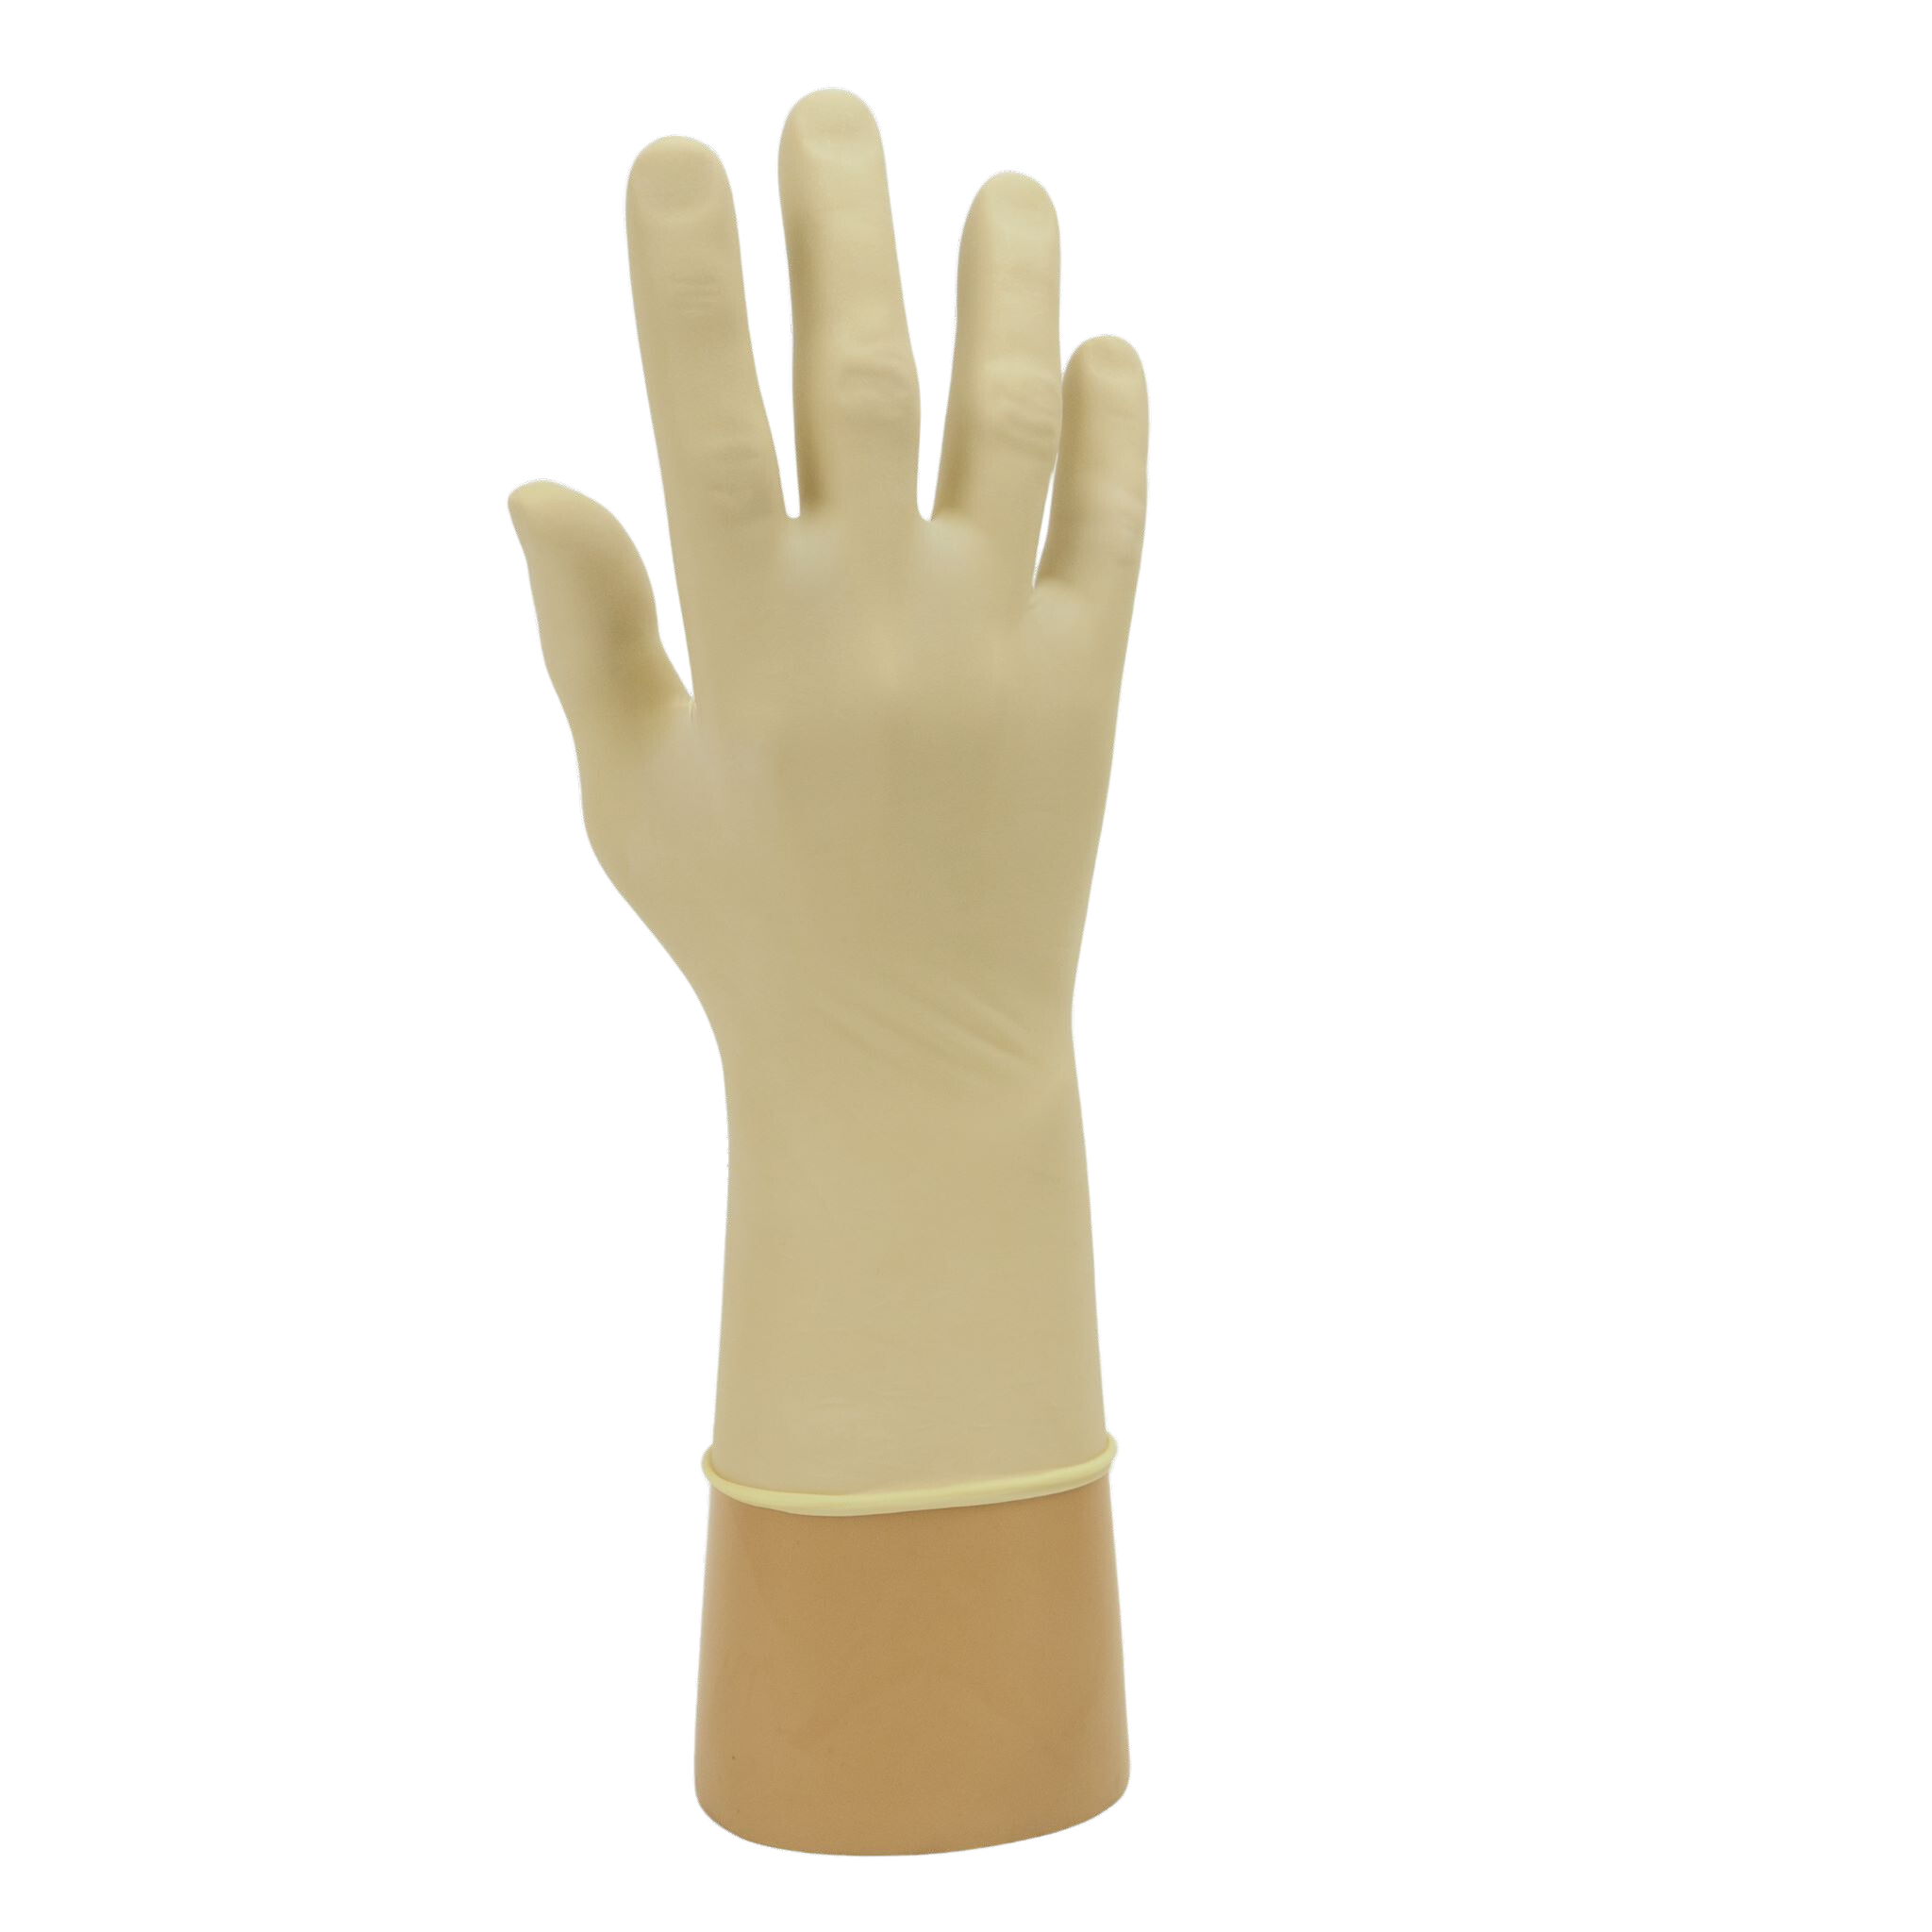 Synthetic Powder Free Glove (Xlarge) - Pack of 100 - GLXLPFS